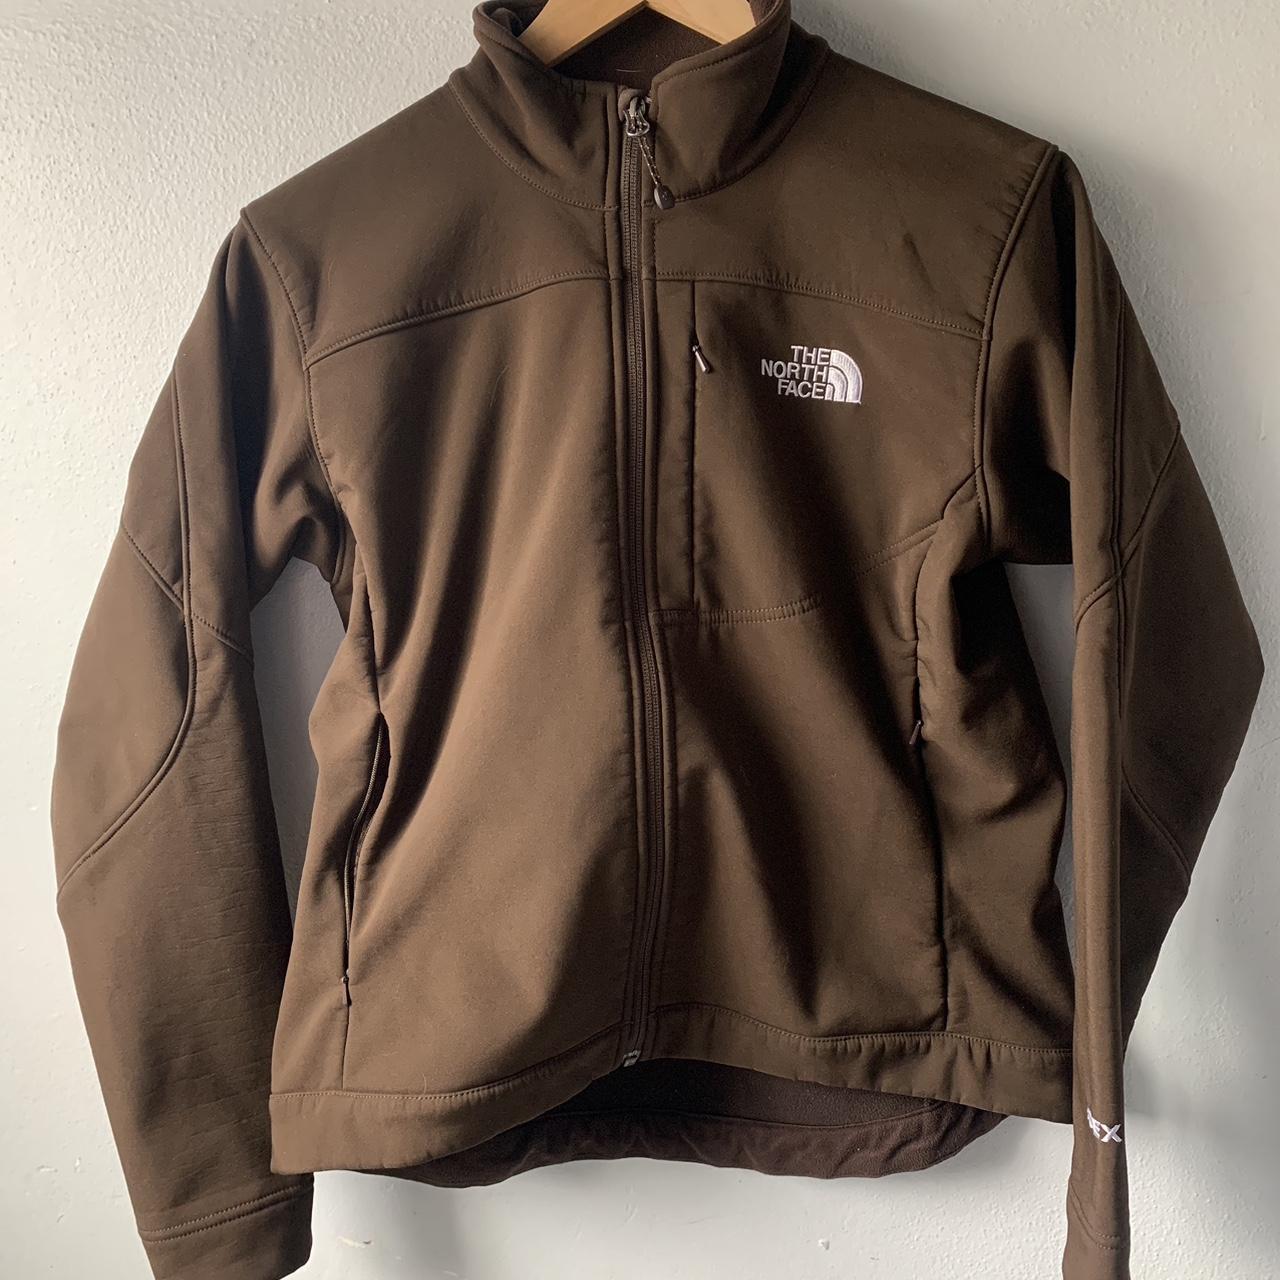 The North Face Women's Brown and White Jacket